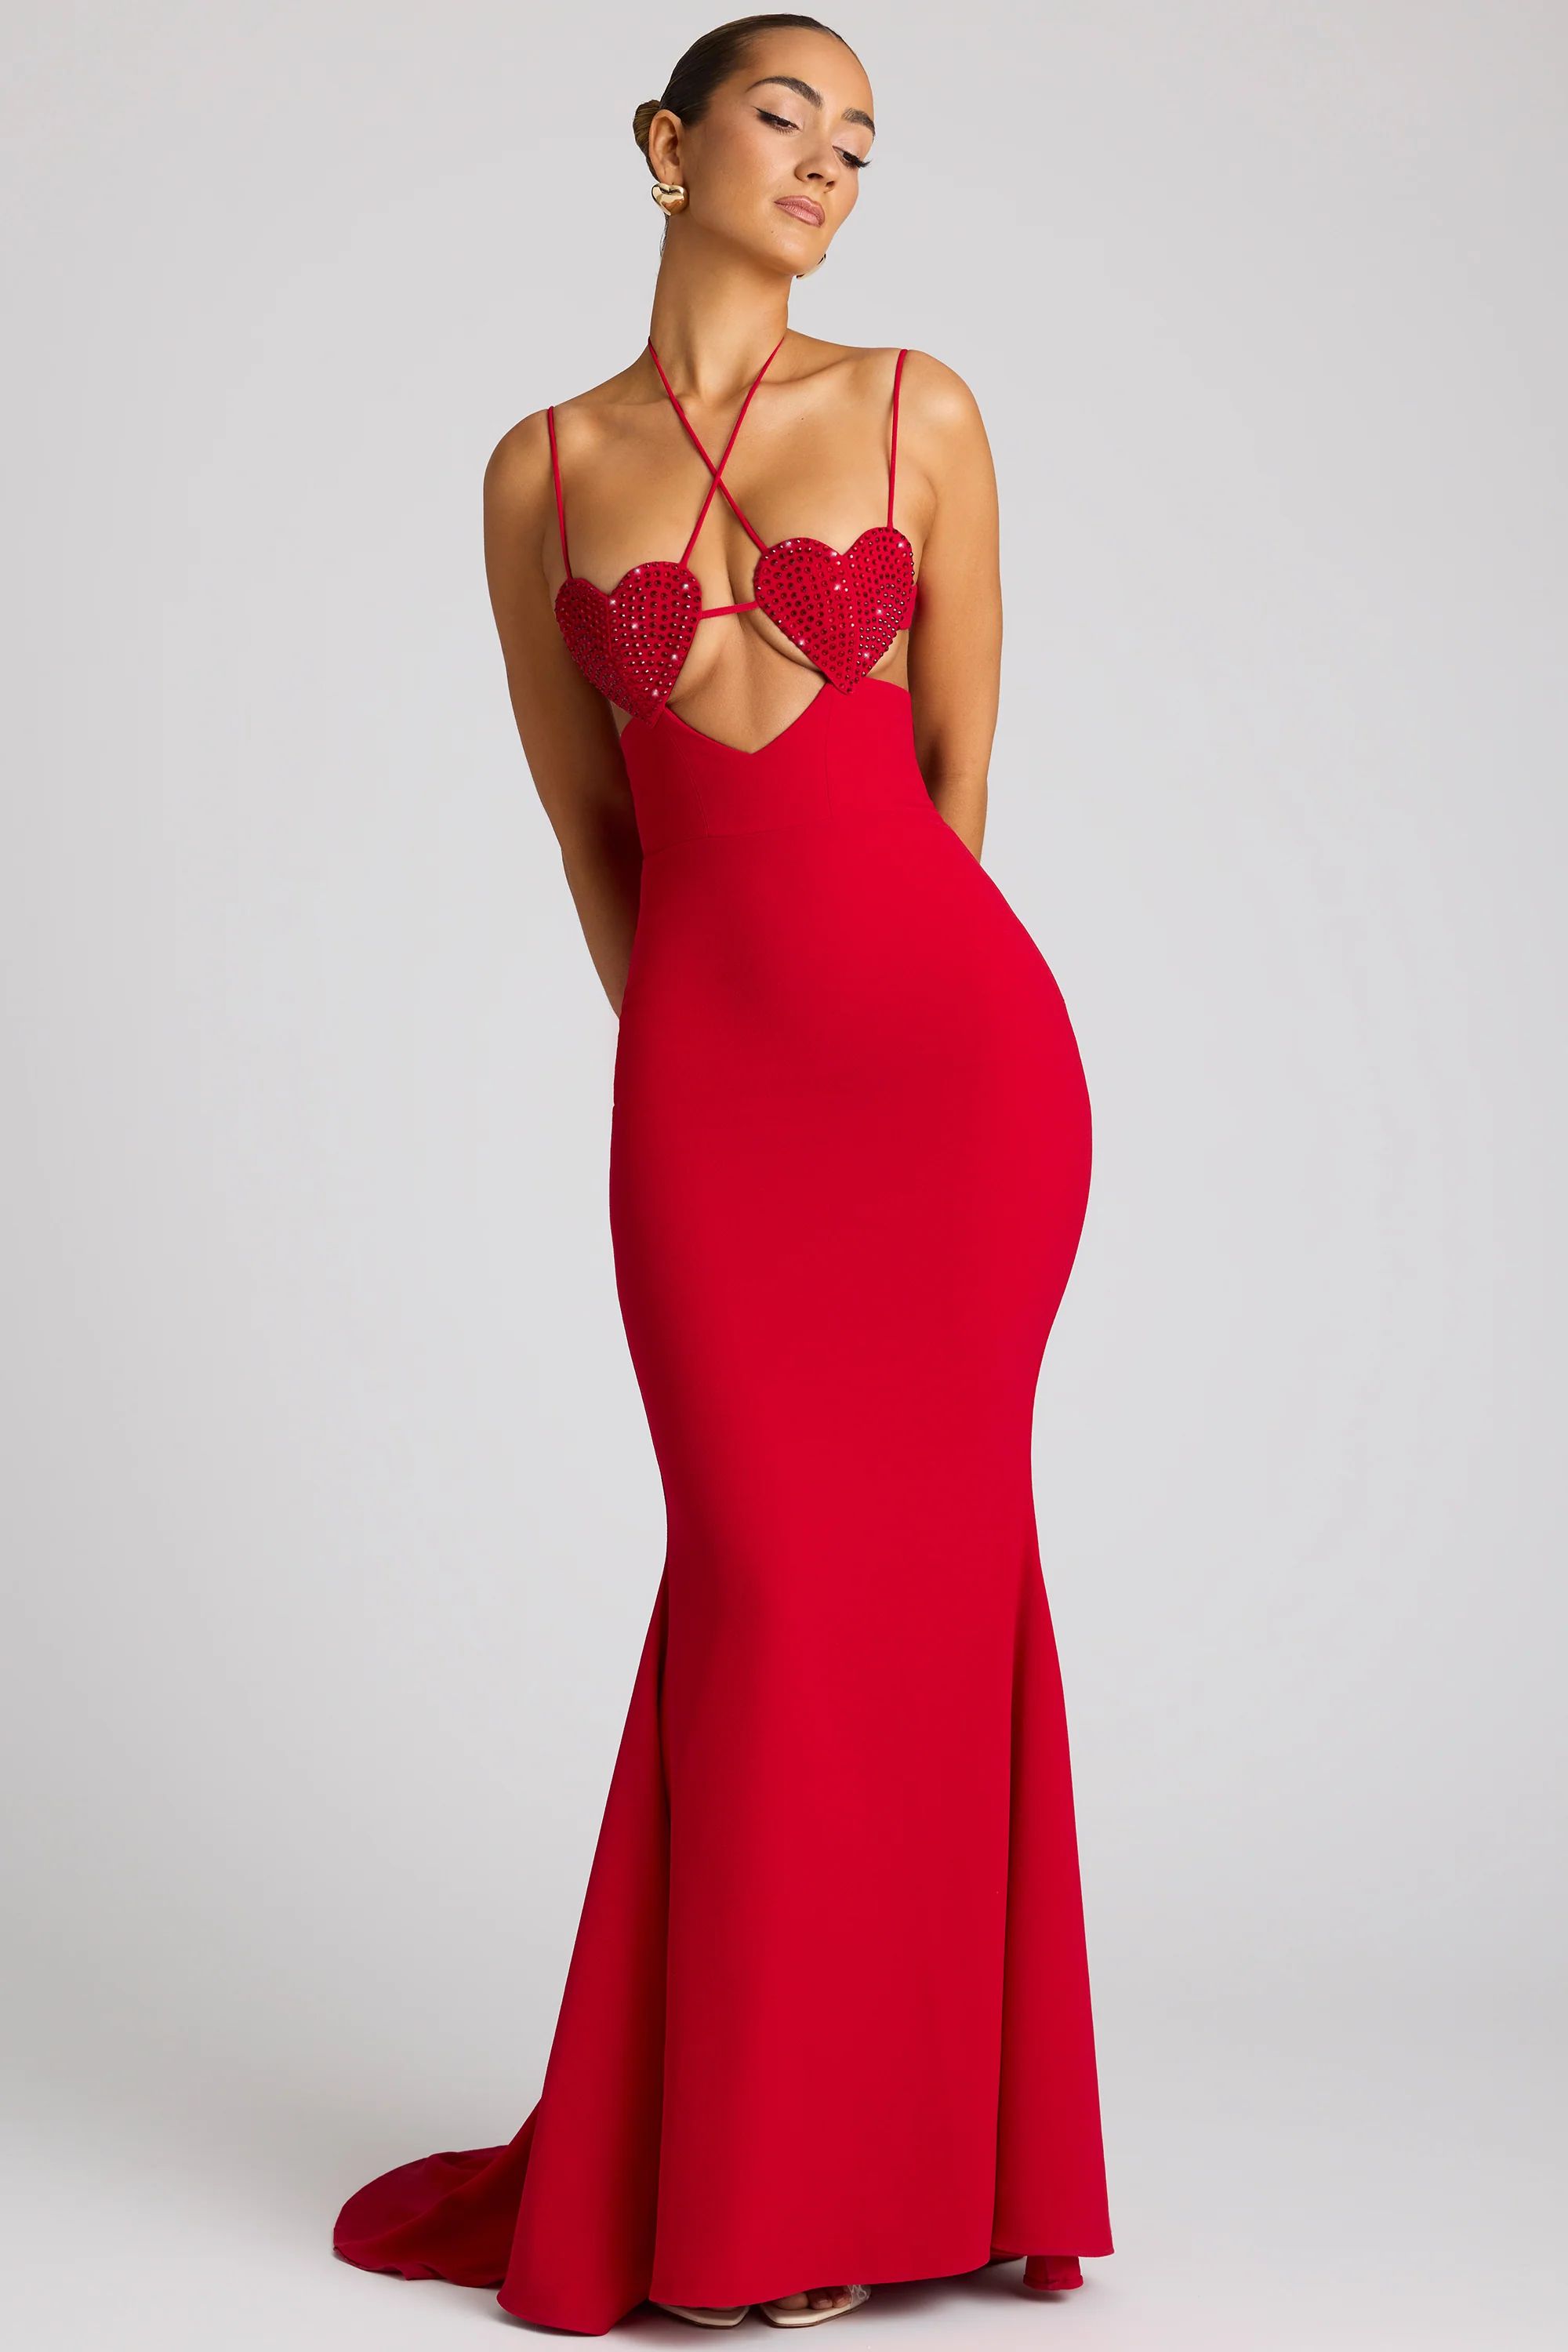 Embellished Heart Cup Detail Evening Gown in Fire Red | Oh Polly